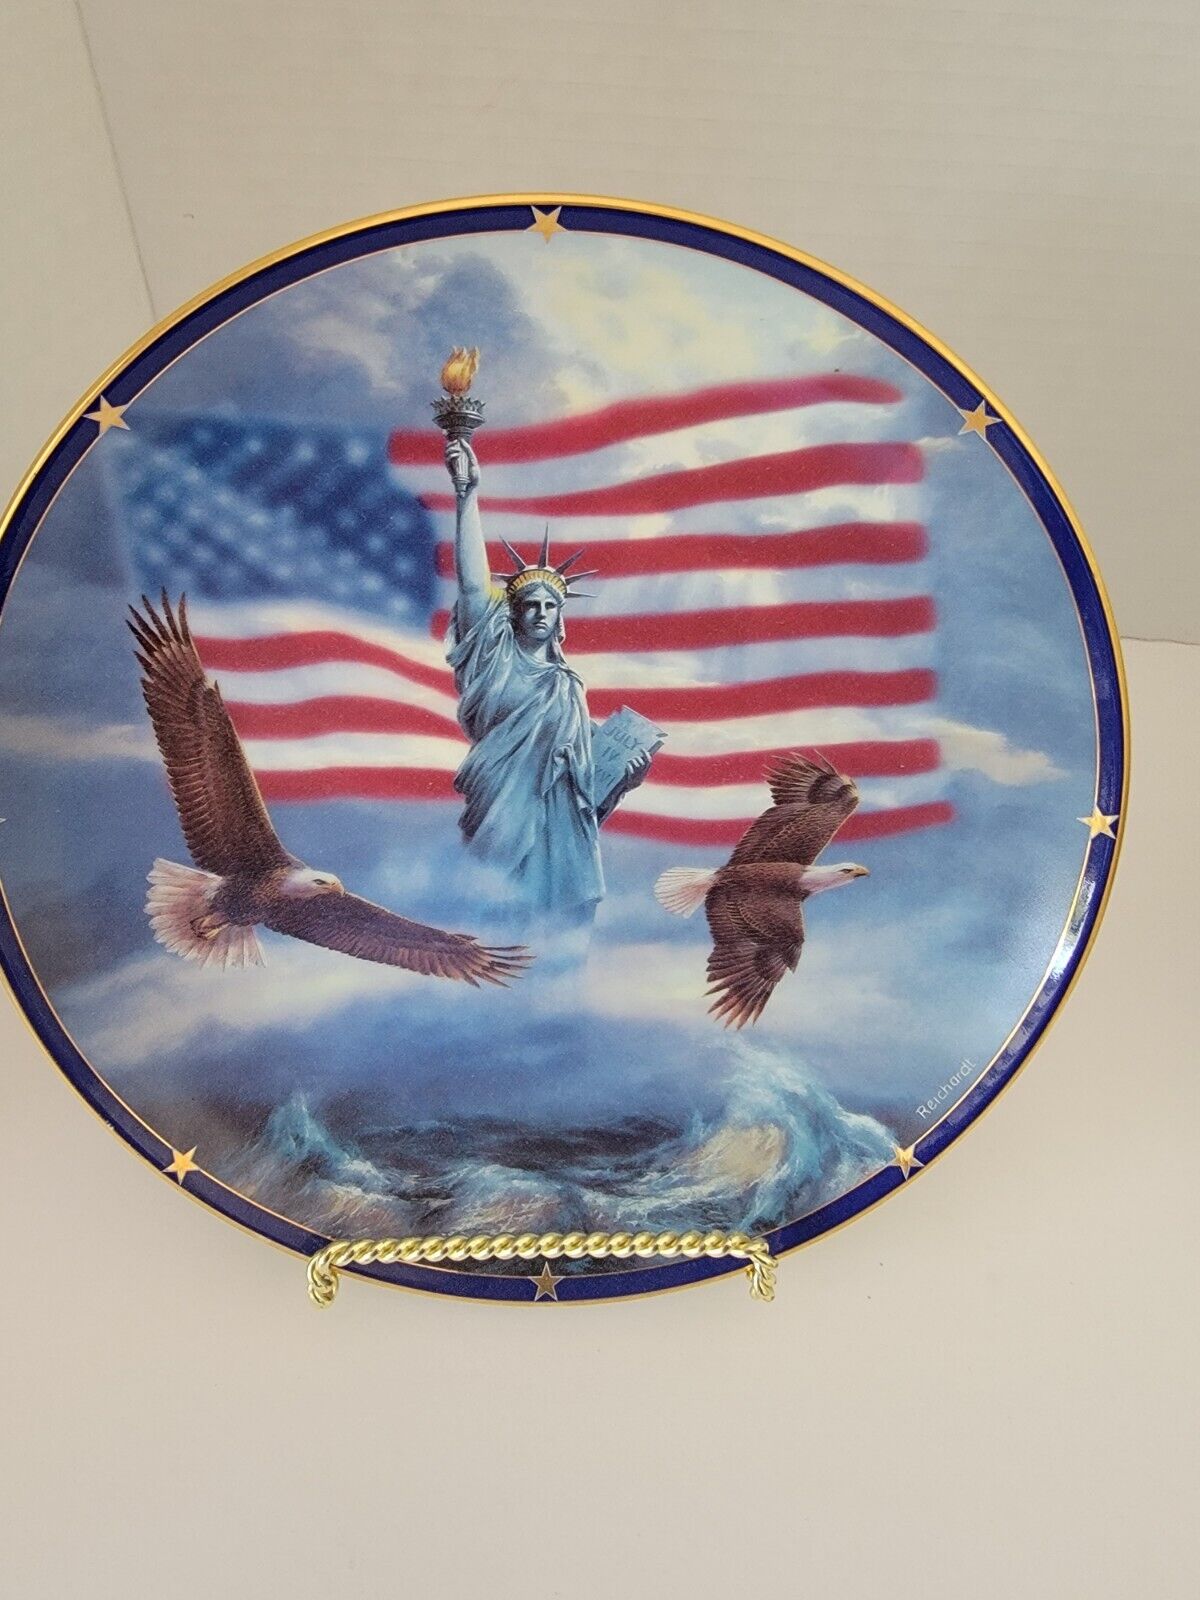 Danbury Mint America Stands Proud Collector’s Plate & God Bless America Plate